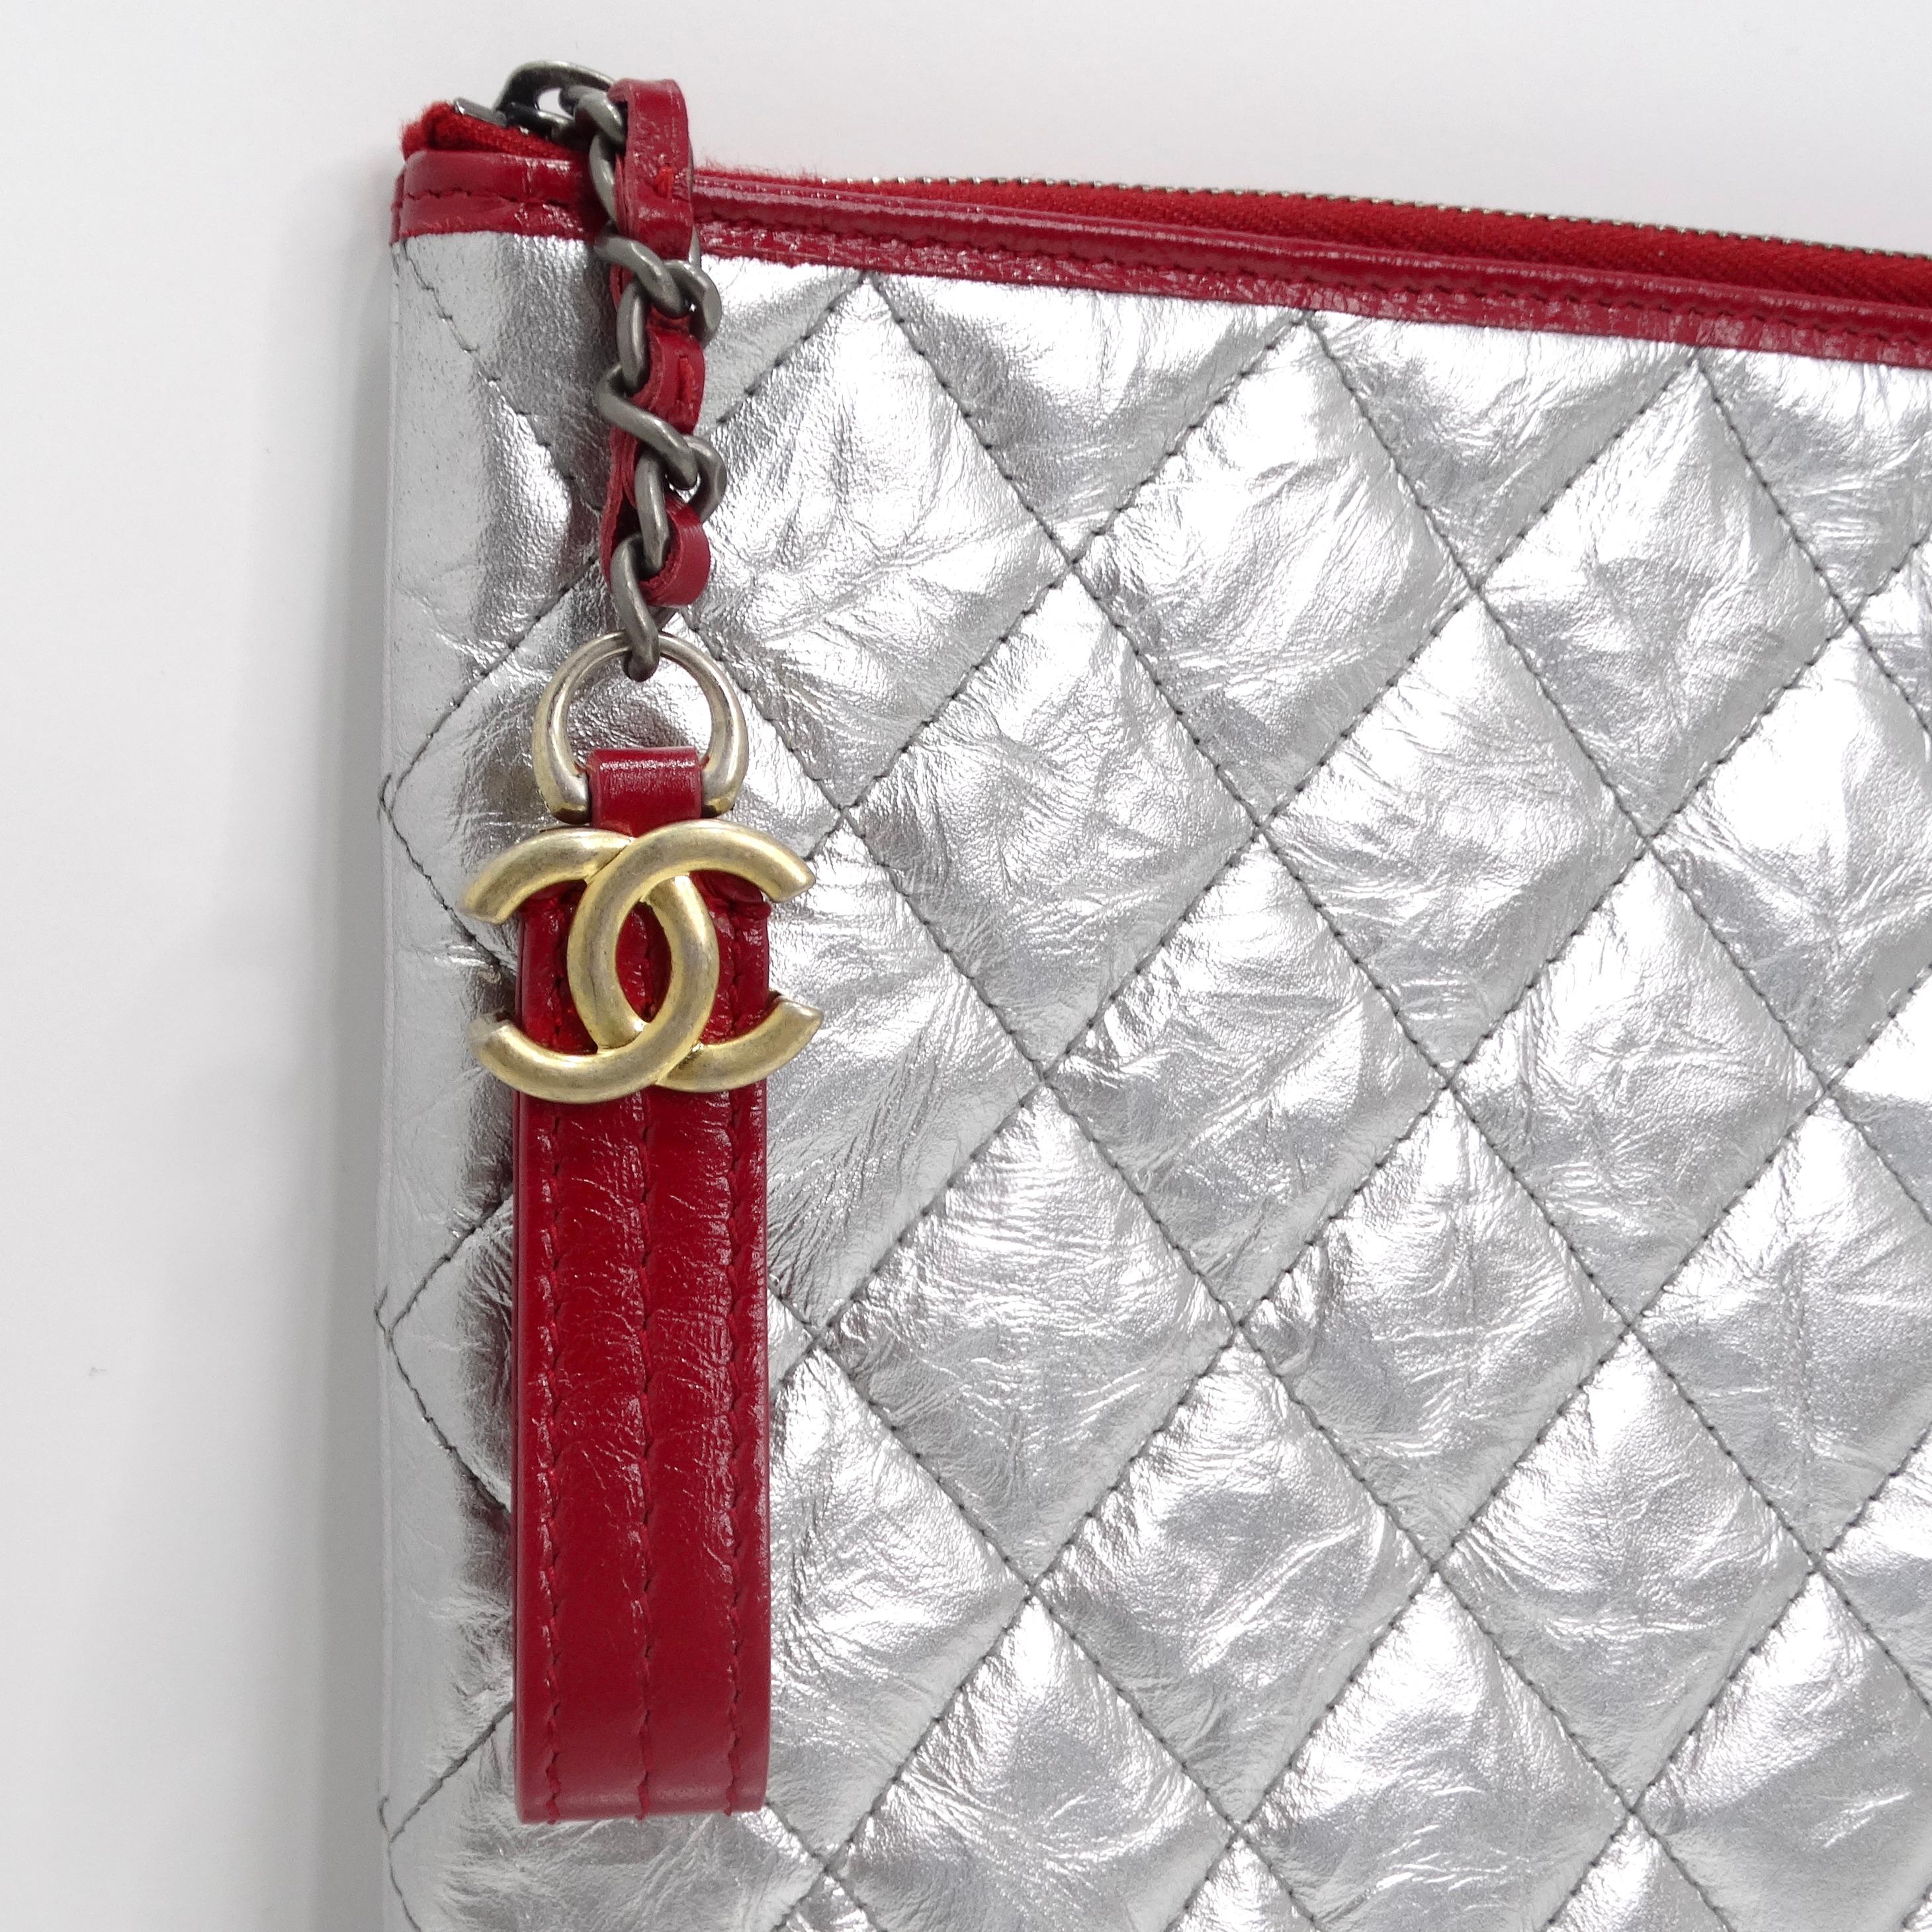 Introducing the Chanel Silver Leather Gabrielle Clutch – a timeless and chic accessory that adds a touch of modern elegance to any ensemble. Crafted from luxurious metallic silver leather, this large rectangular clutch exudes sophistication and